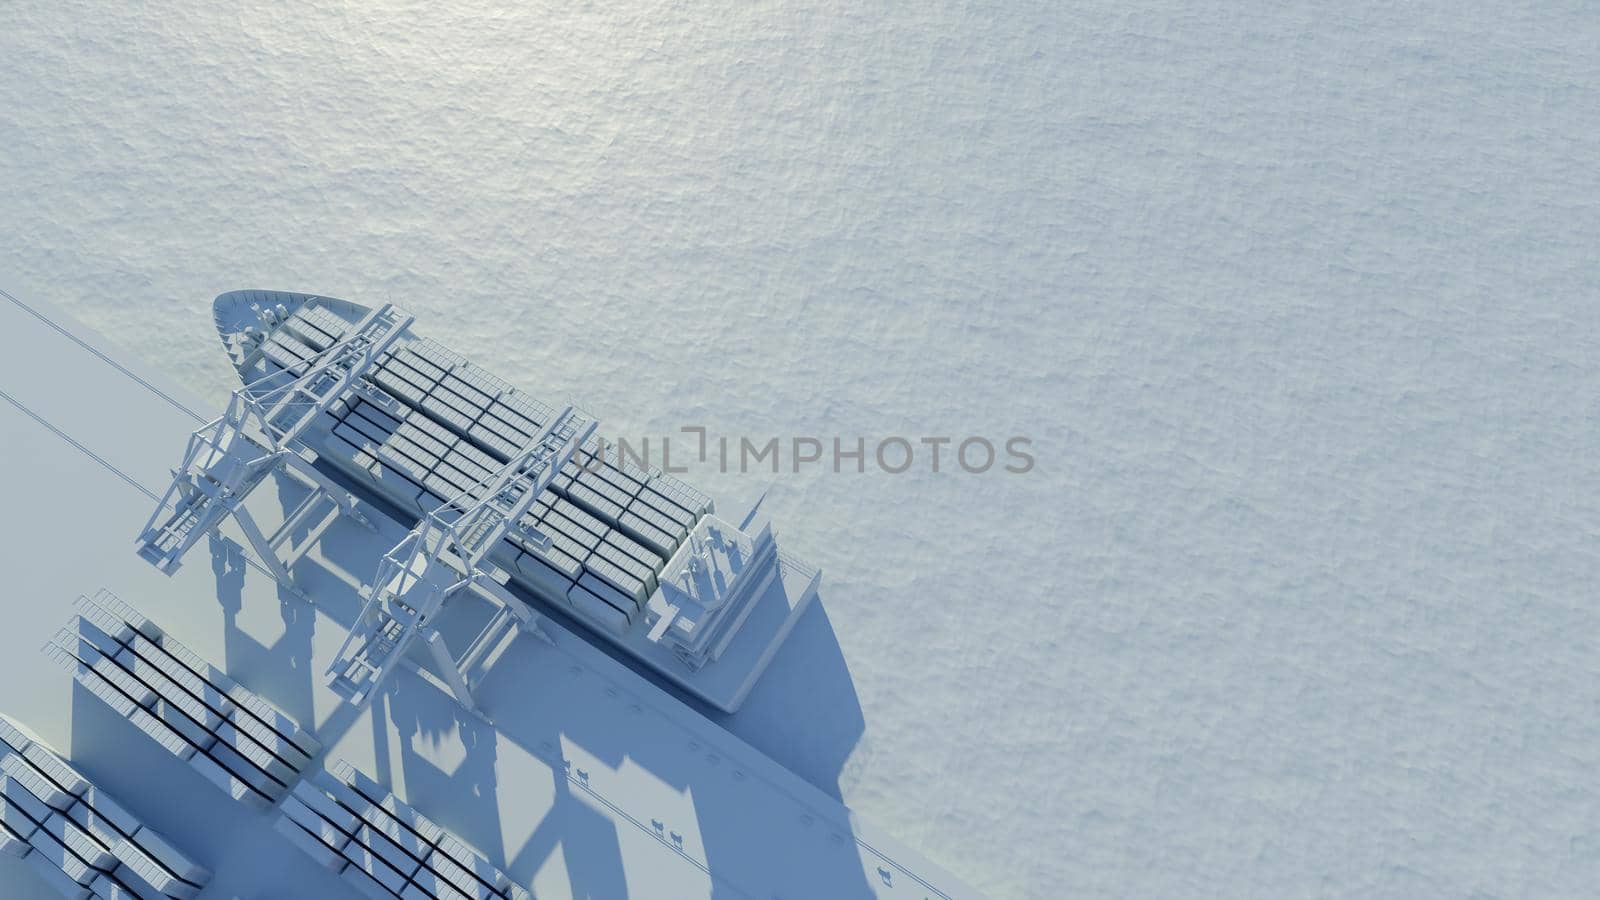 Port cranes loading containers on a cargo ship at the port. Elevated view. Digital 3D render with white material.